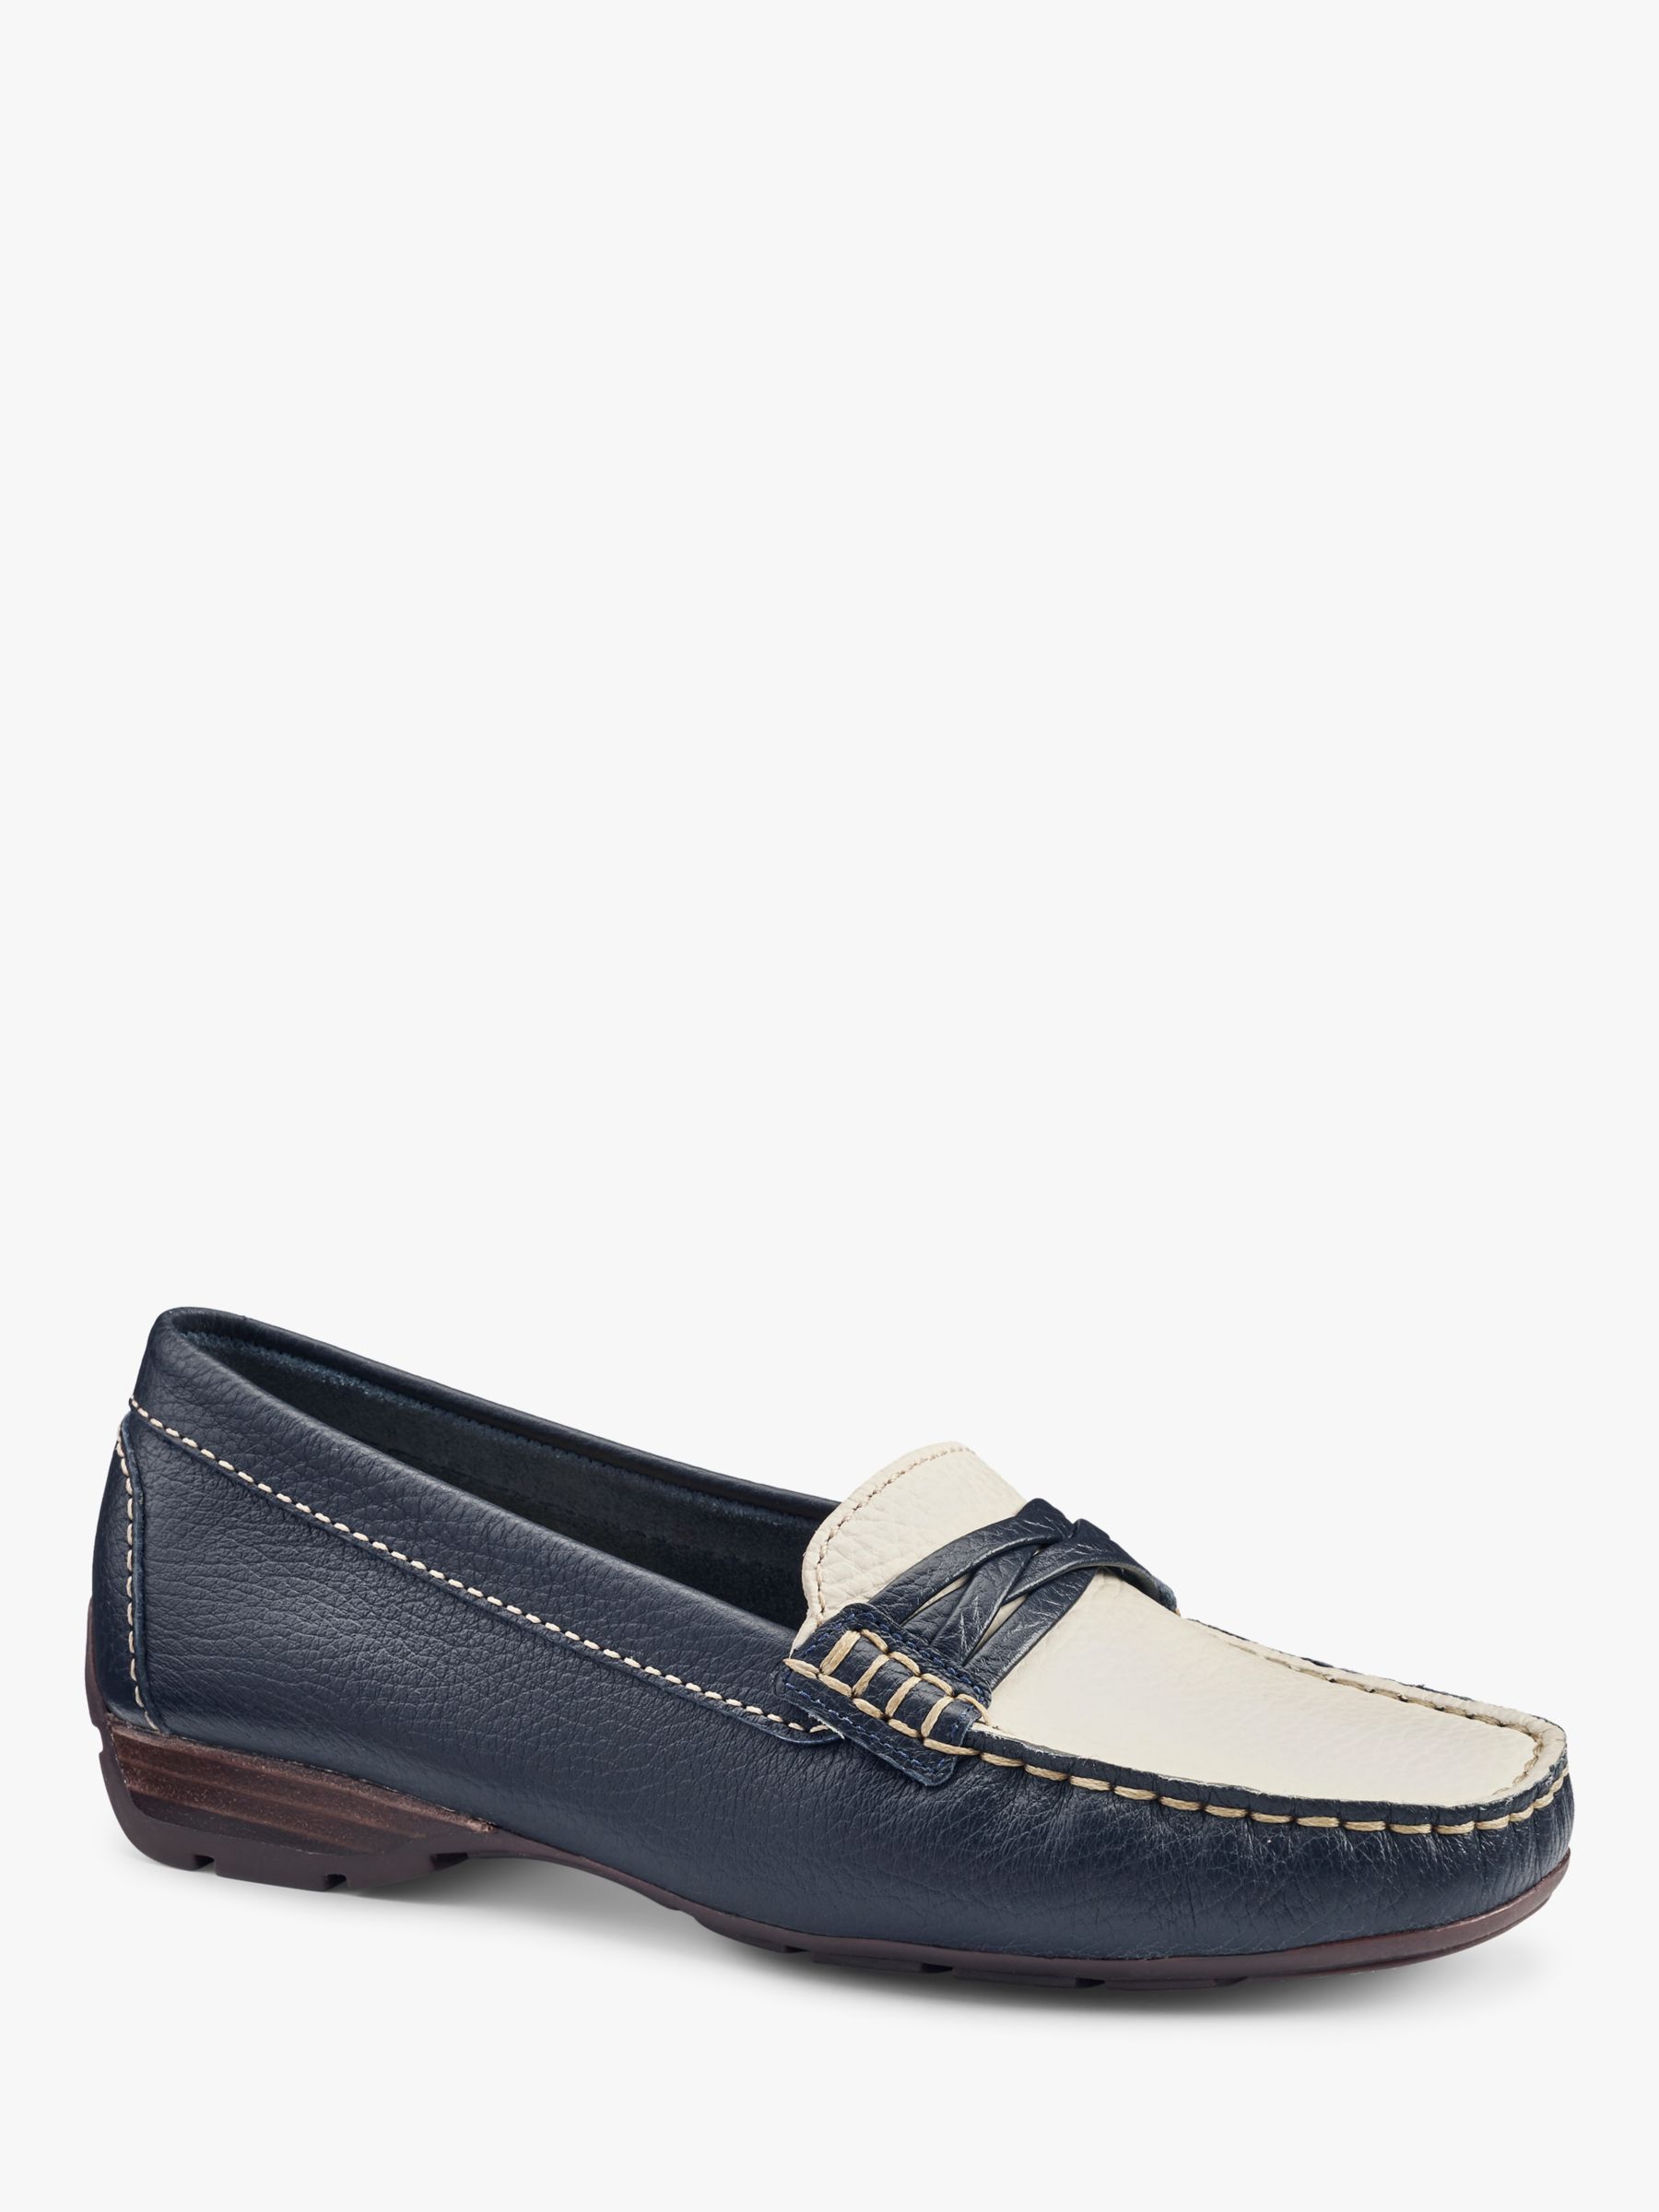 Buy Hotter Marina Driver Style Moccasins Online at johnlewis.com